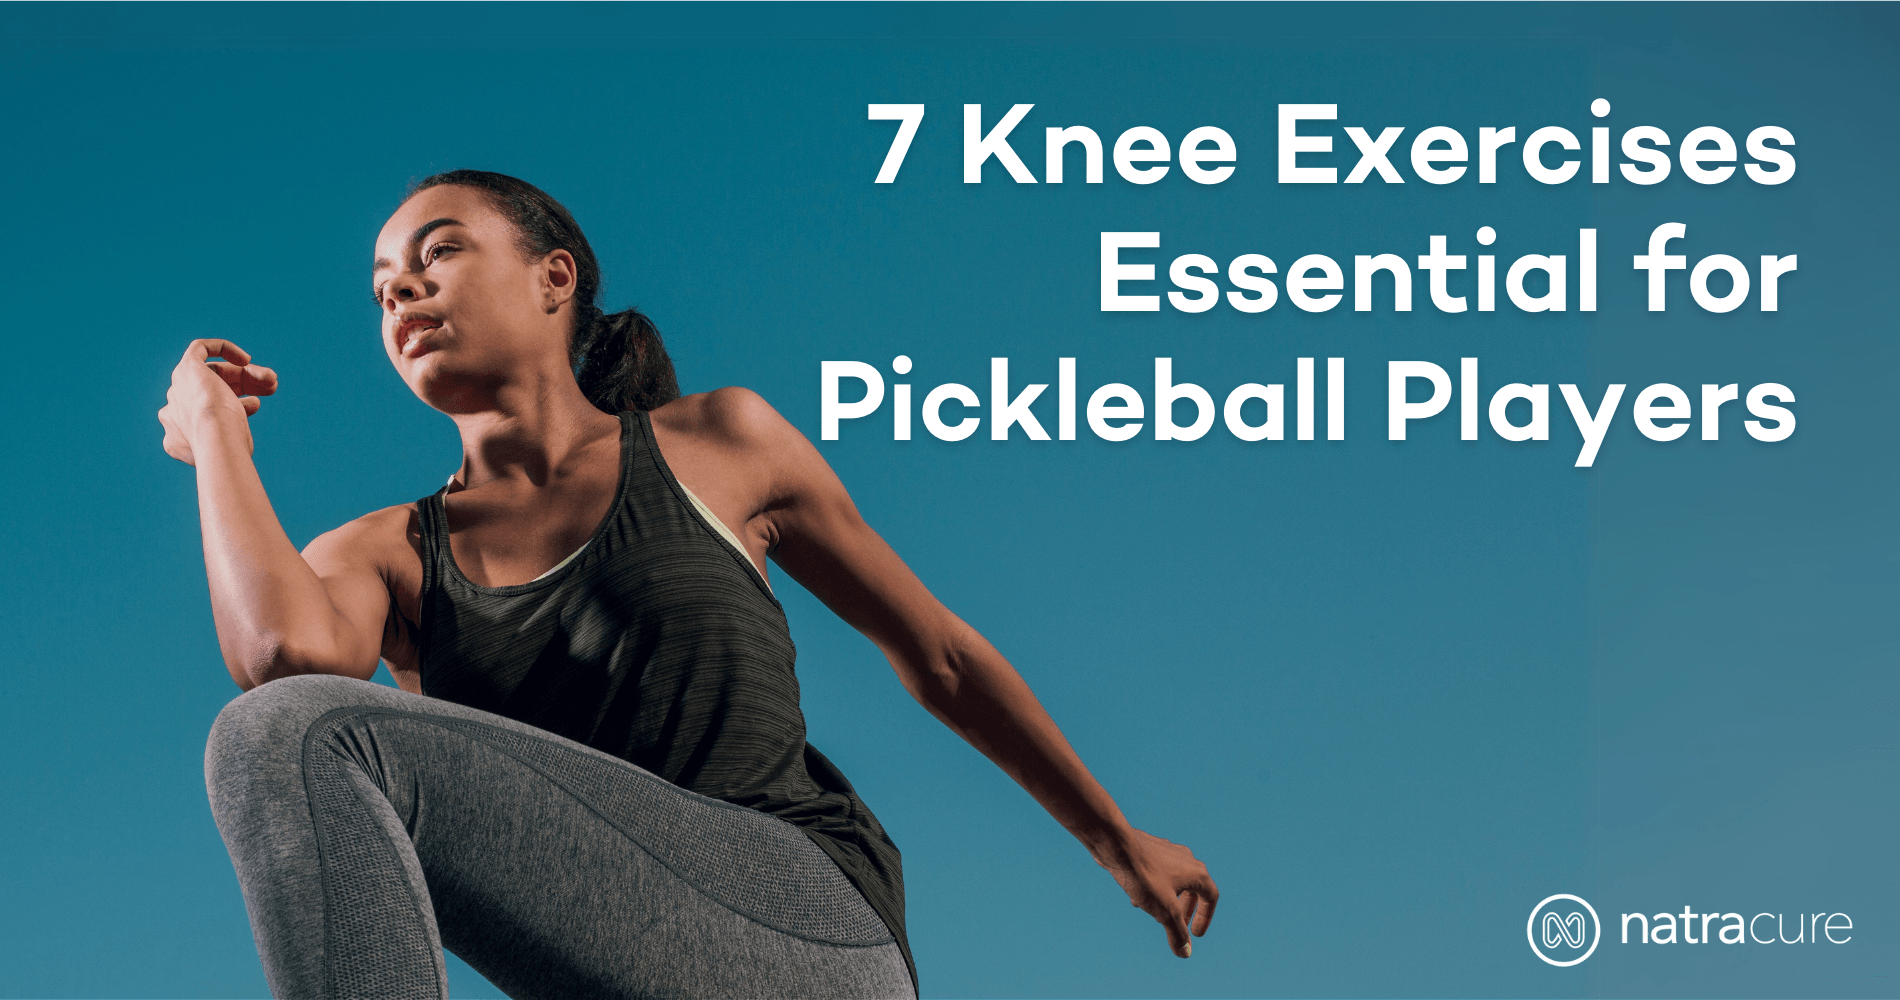 7 Knee Exercises Essential for Pickleball Players | NatraCure